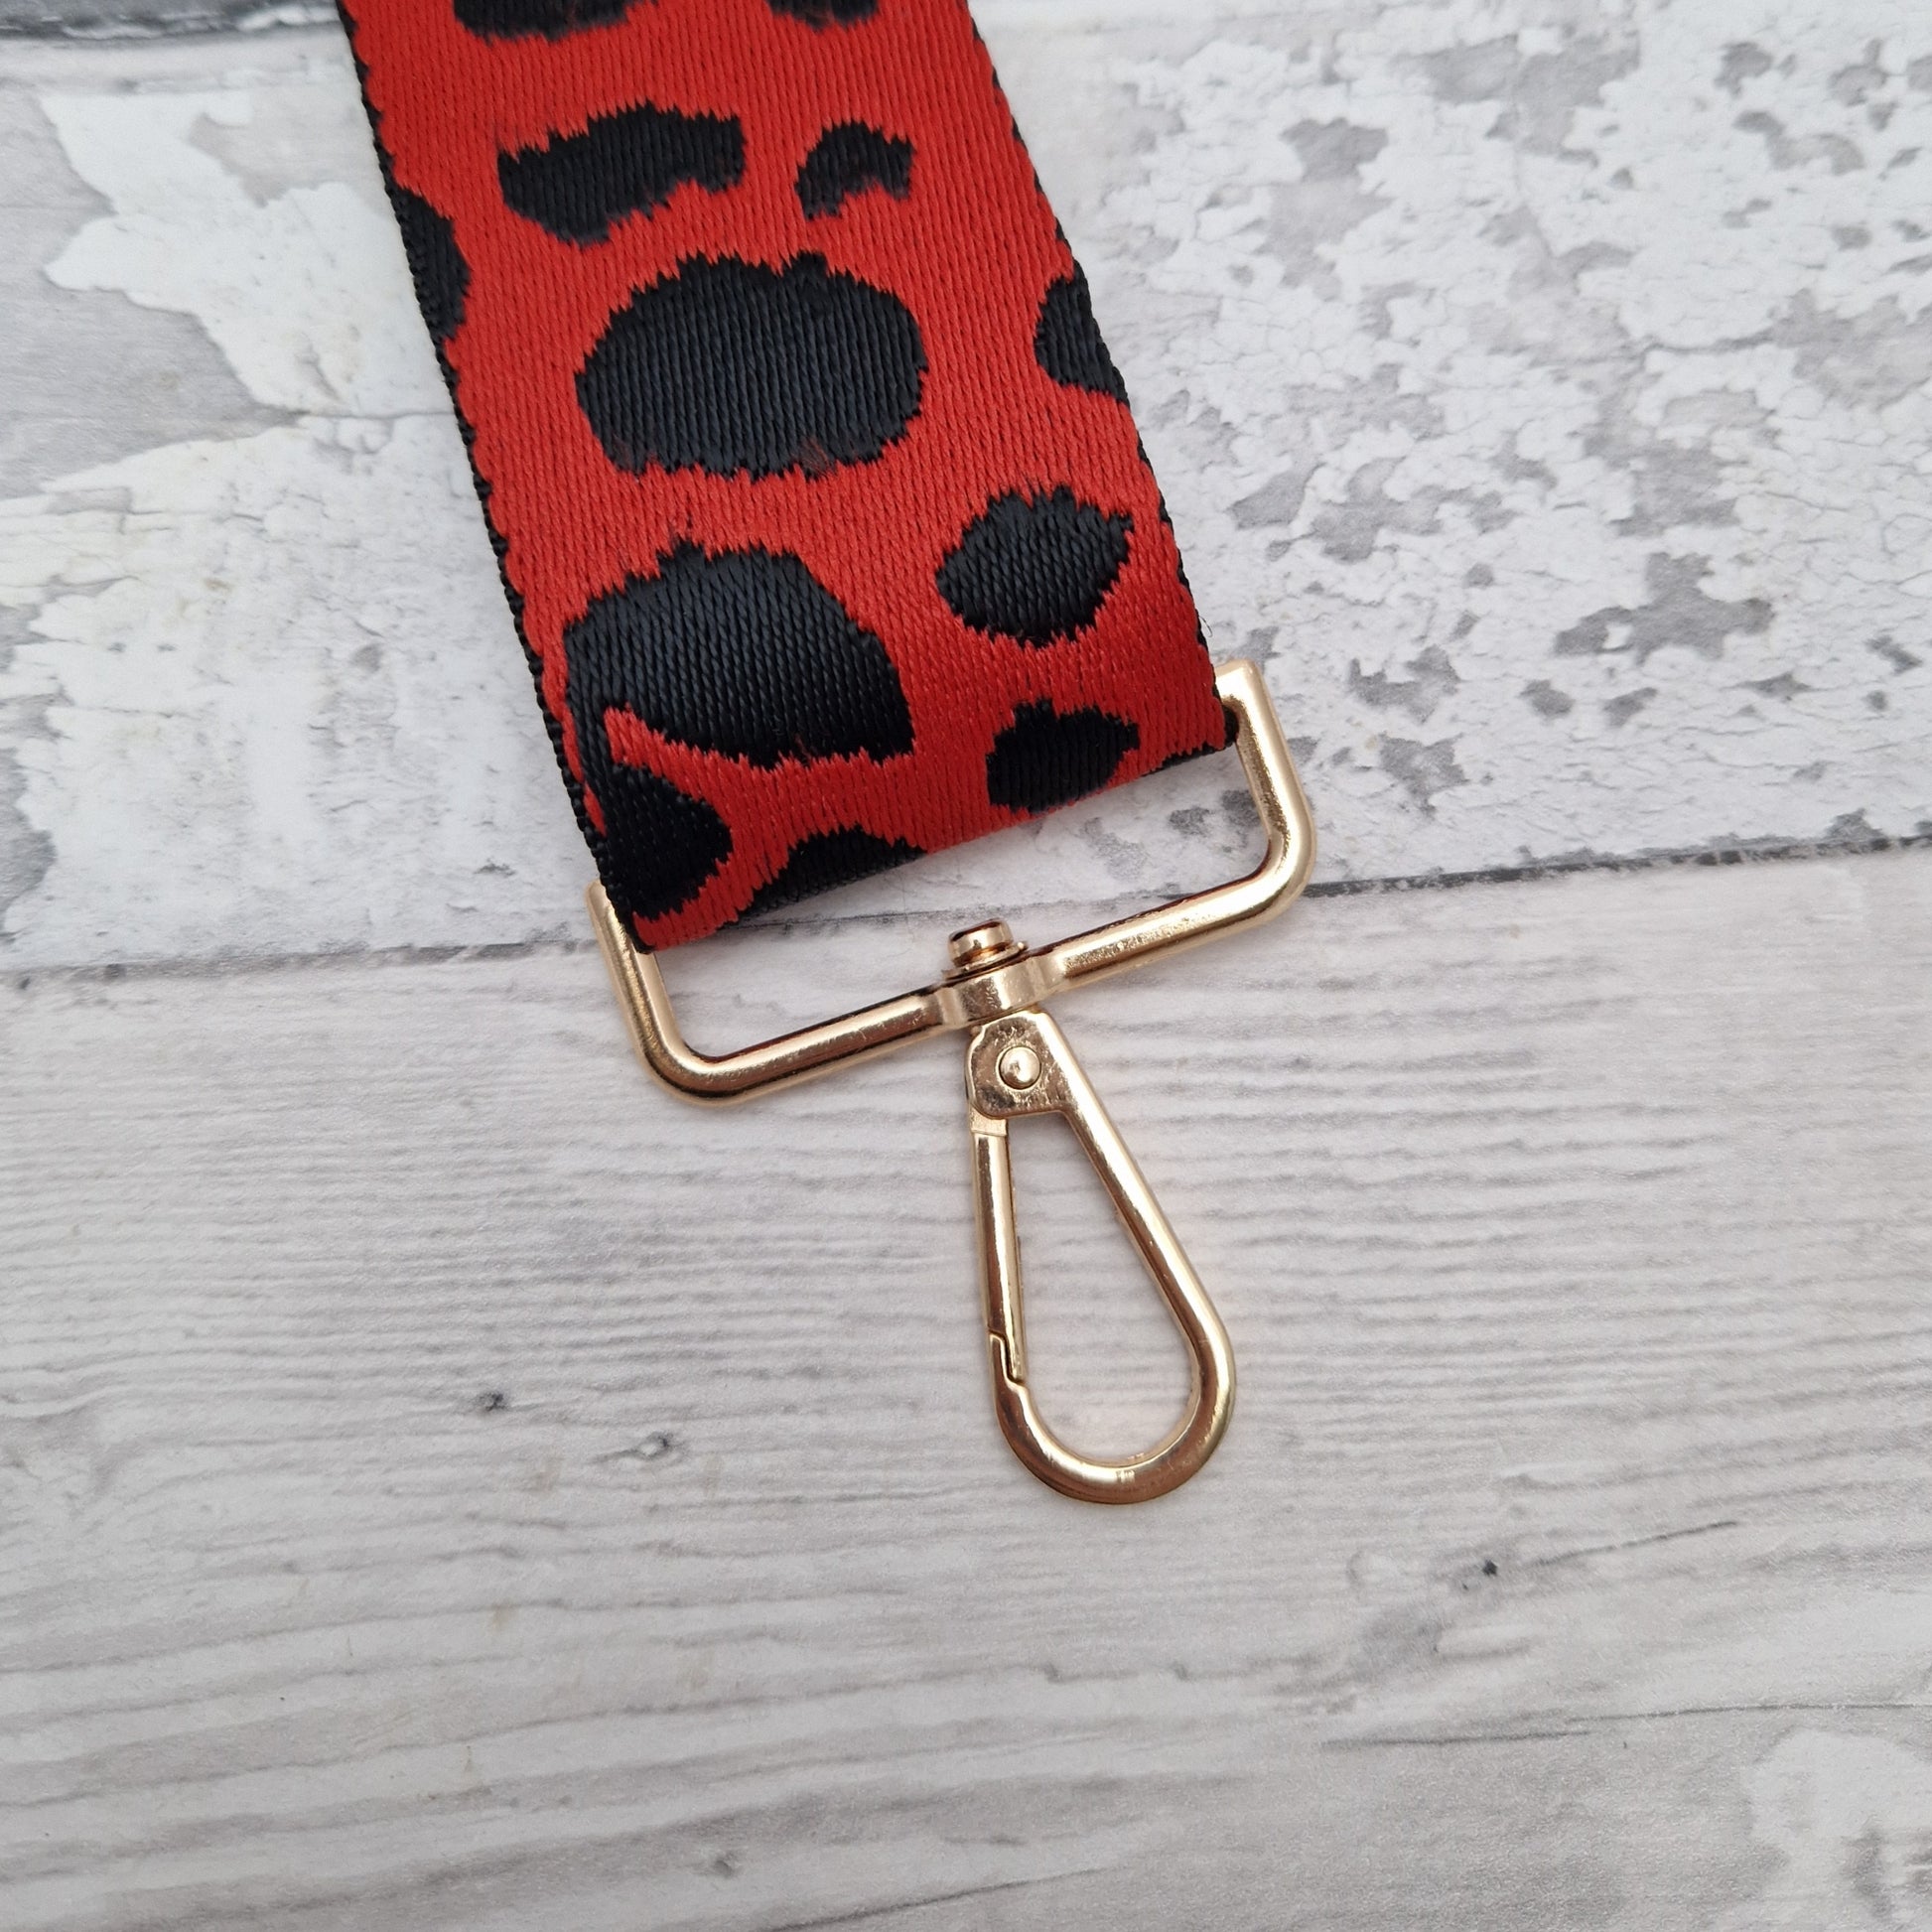 Red Cross body bag strap decorated with irregular black spots.